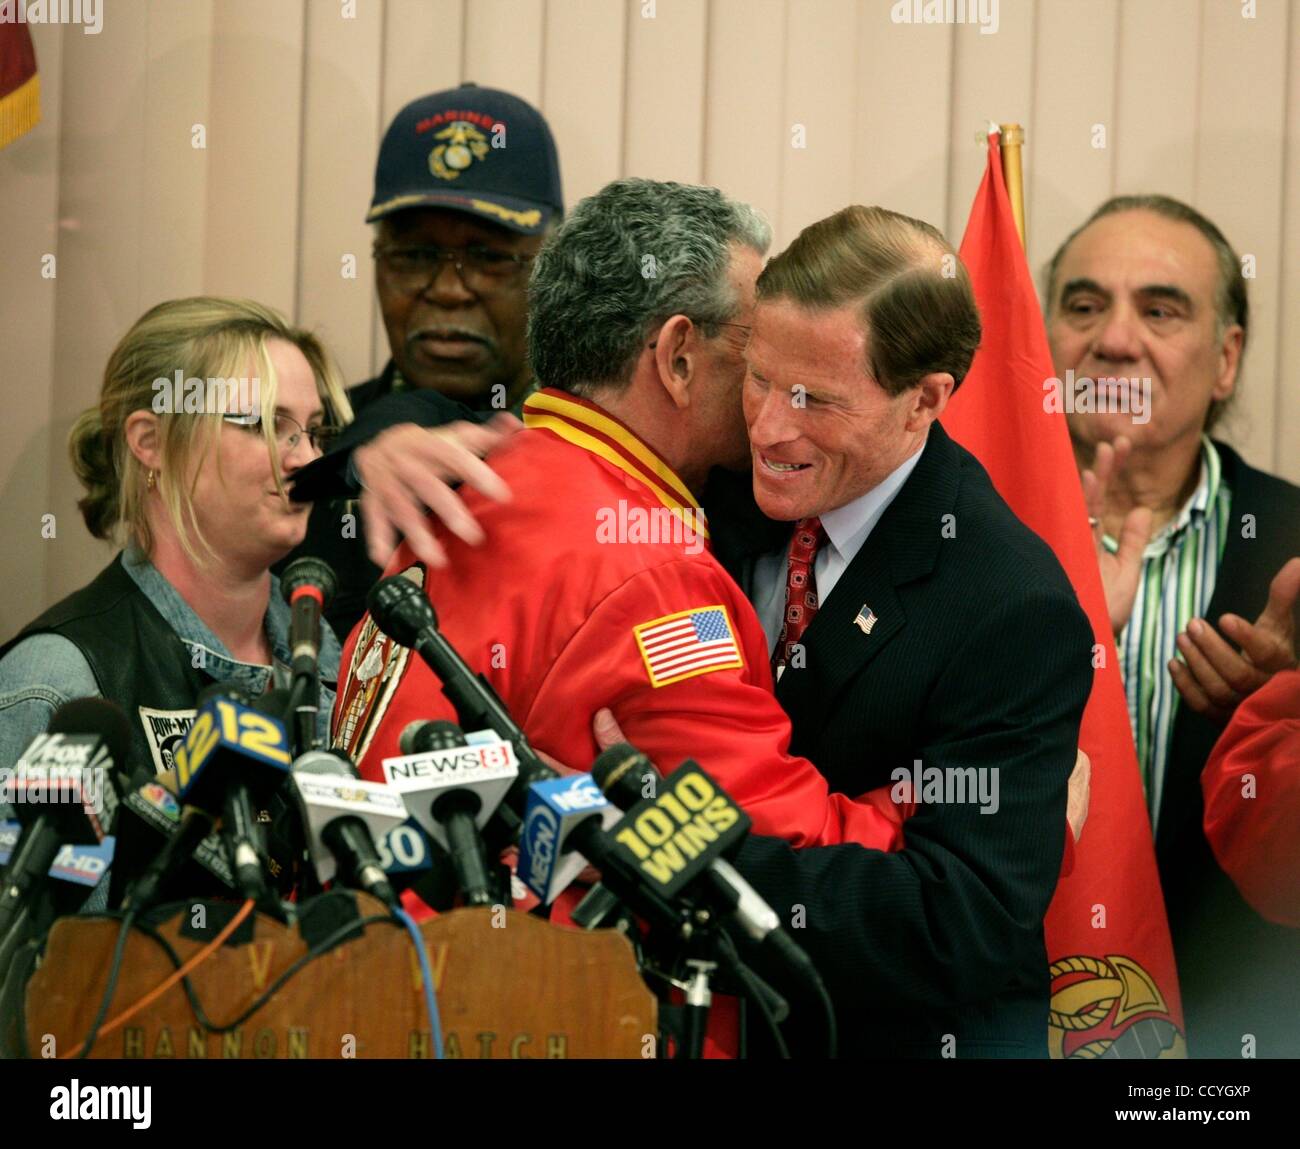 May 18, 2010 - West Hartford, Connecticut, U.S. - CT Attorney General and Democratic candidate for the United States Senate RICHARD BLUMENTHAL is surrounded veterans and hugs PETER GALGANO of the Marine Corps League of CT as he defends himself against allegations that he misstated his military recor Stock Photo